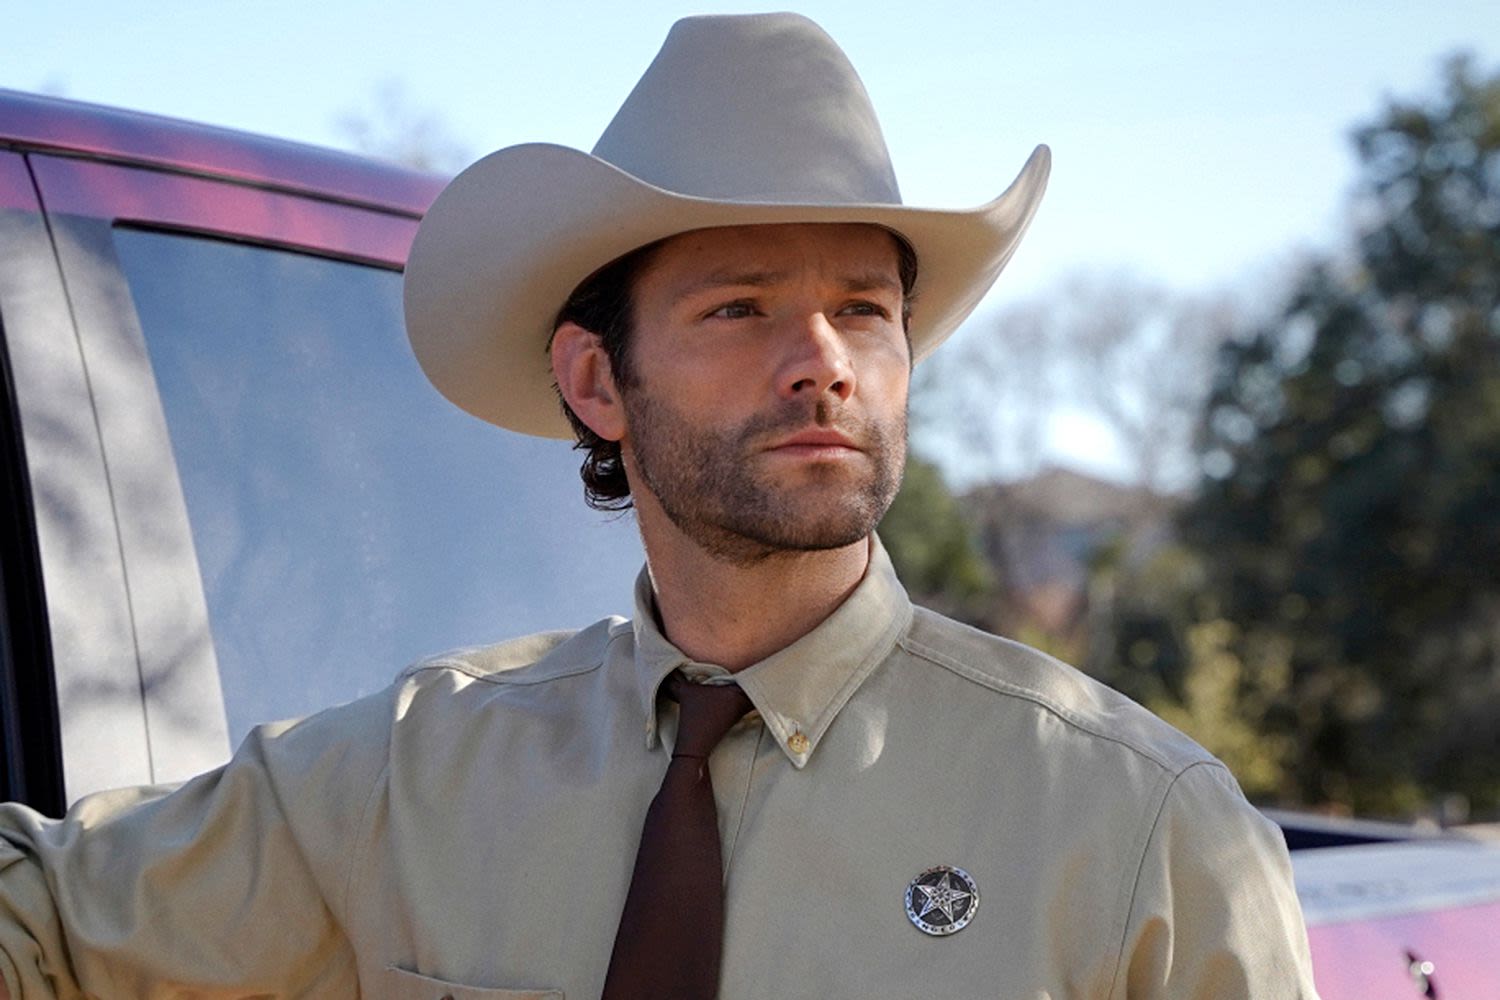 “Walker, Texas Ranger” Reboot with Jared Padalecki Canceled at The CW After 4 Seasons